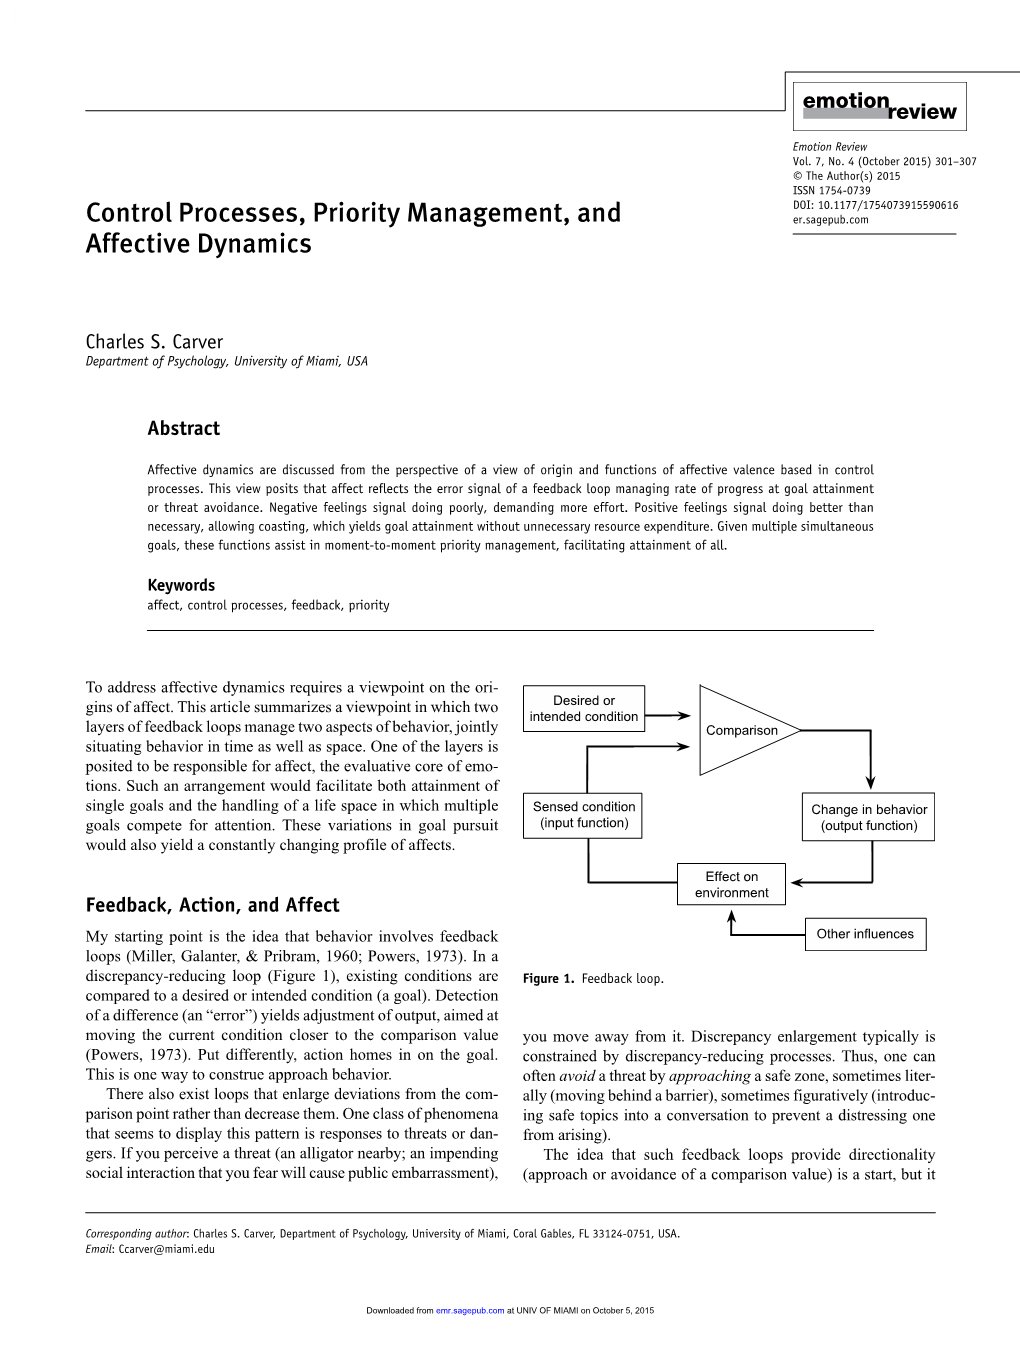 Control Processes, Priority Management, and Affective Dynamics 590616Research-Article2015